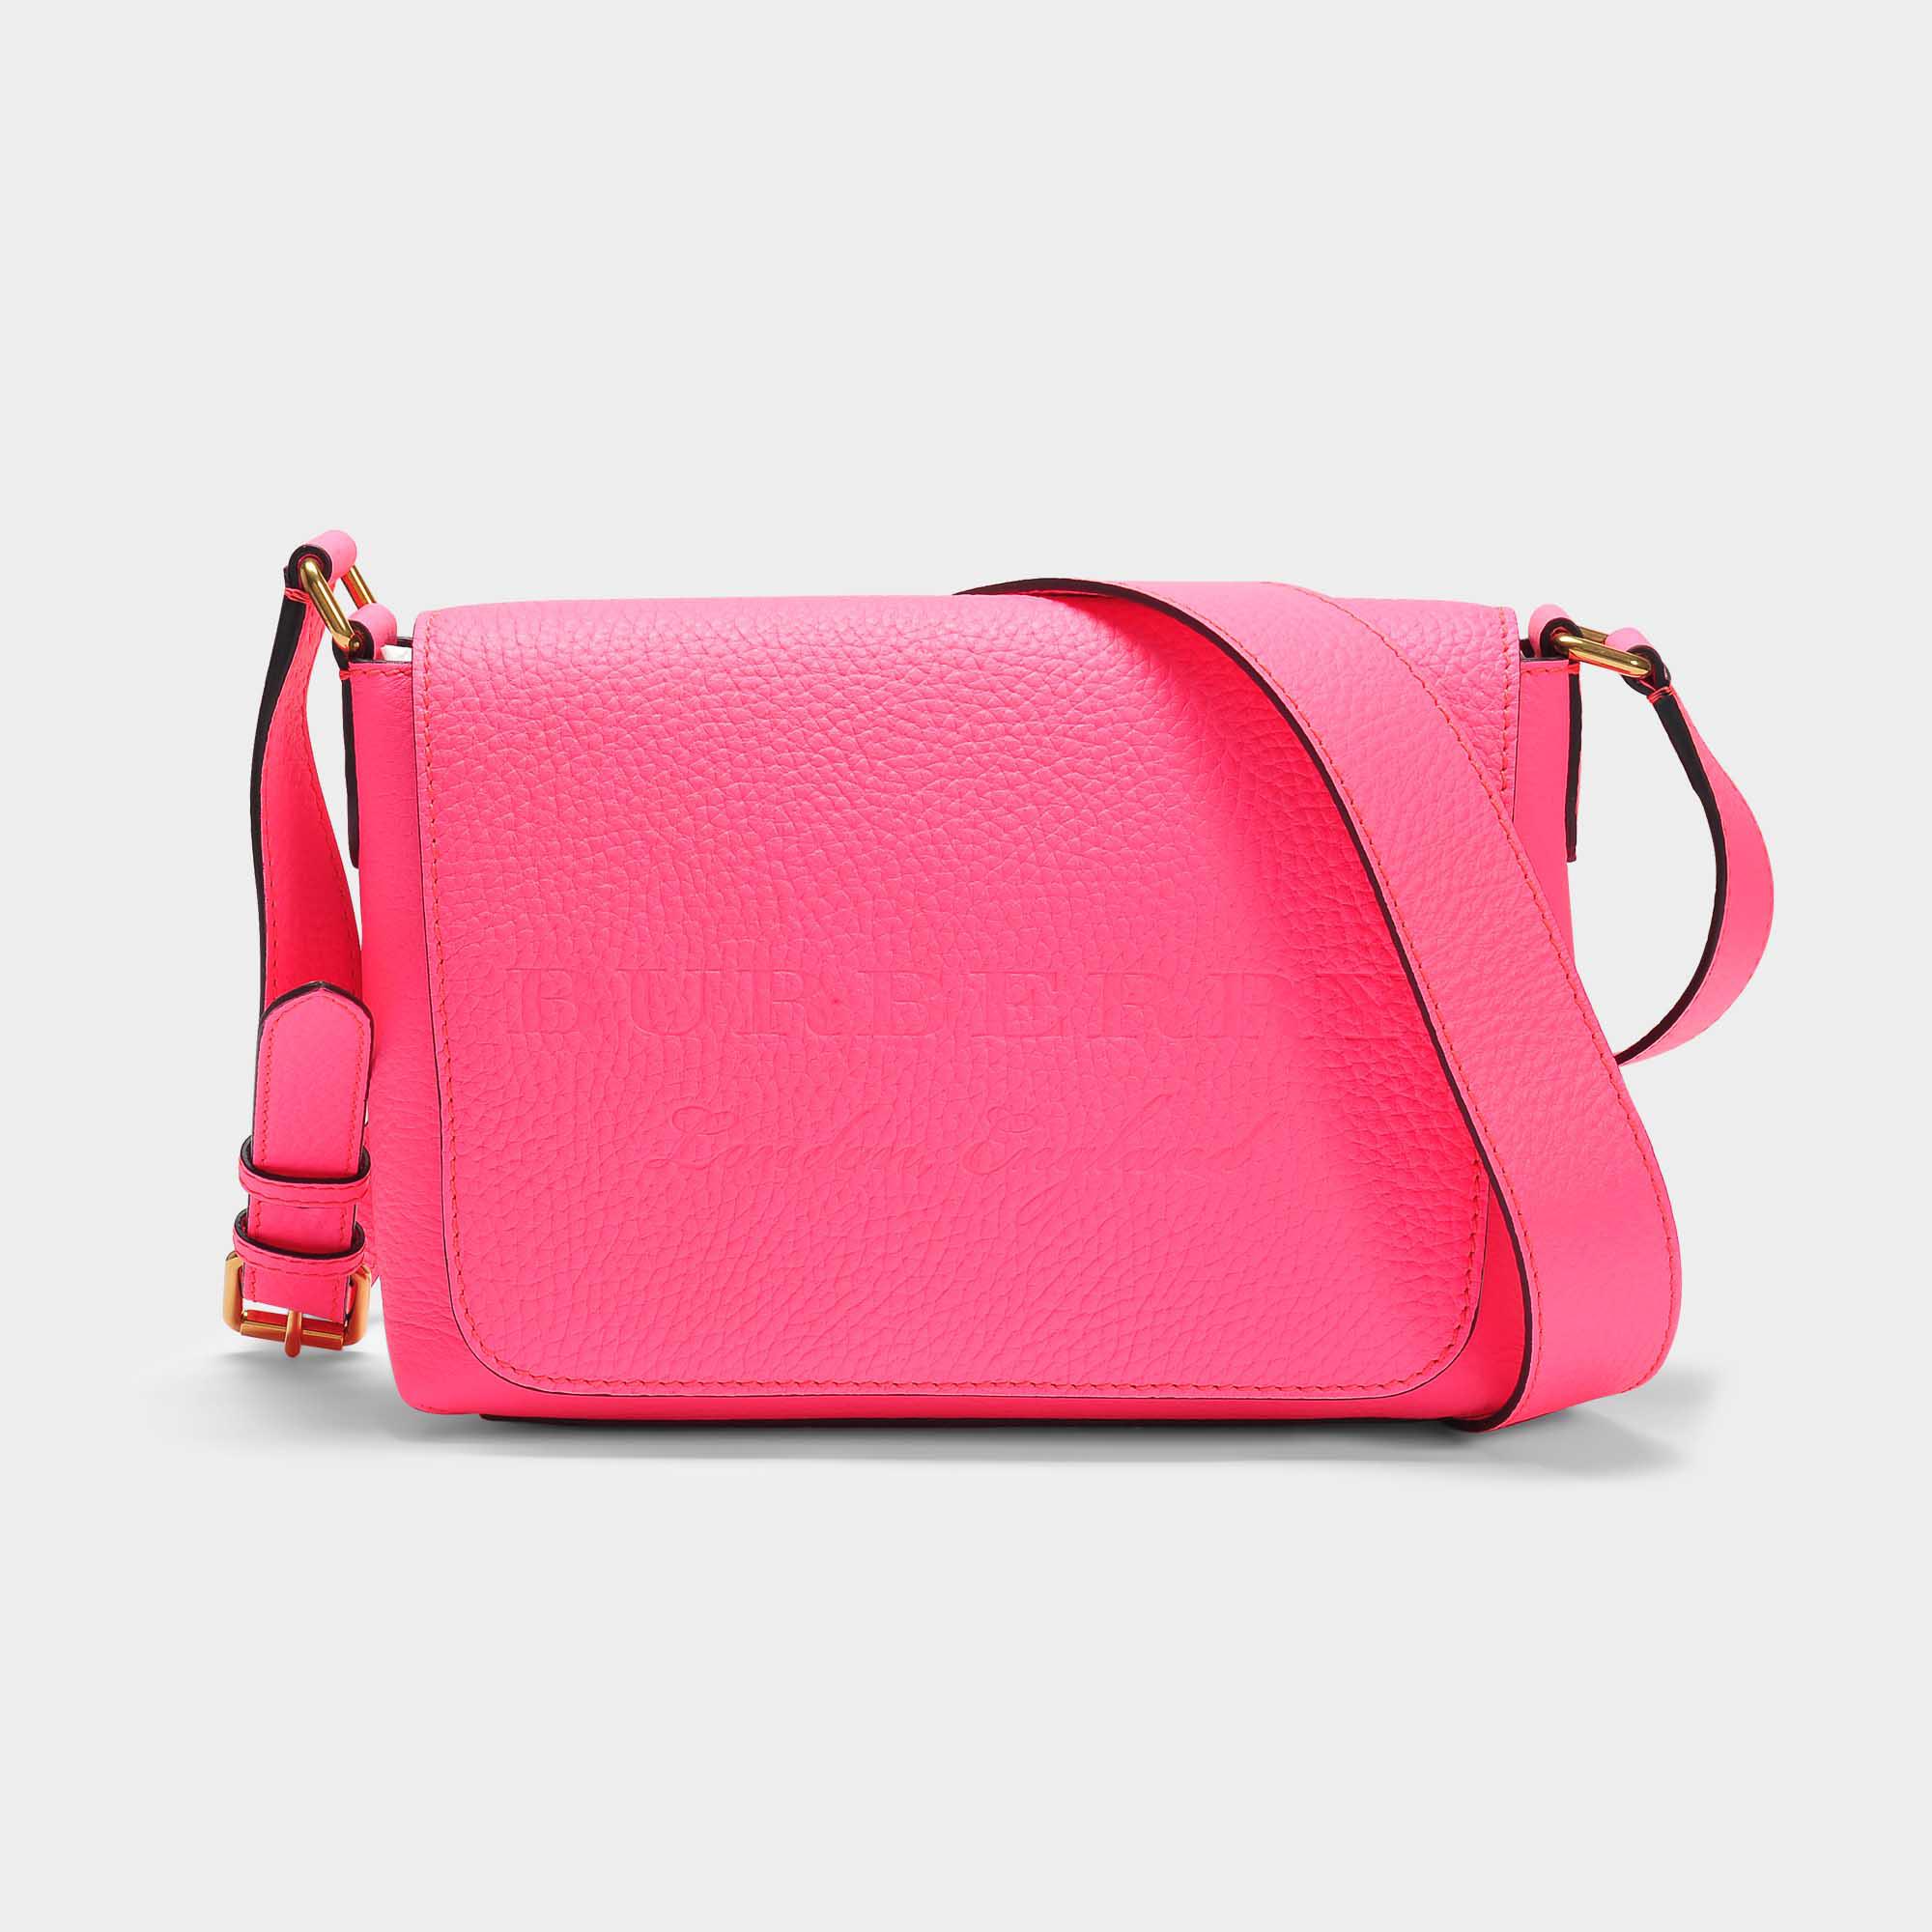 Burberry Leather Small Burleigh Crossbody Bag In Neon Pink Grained Calfskin - Lyst